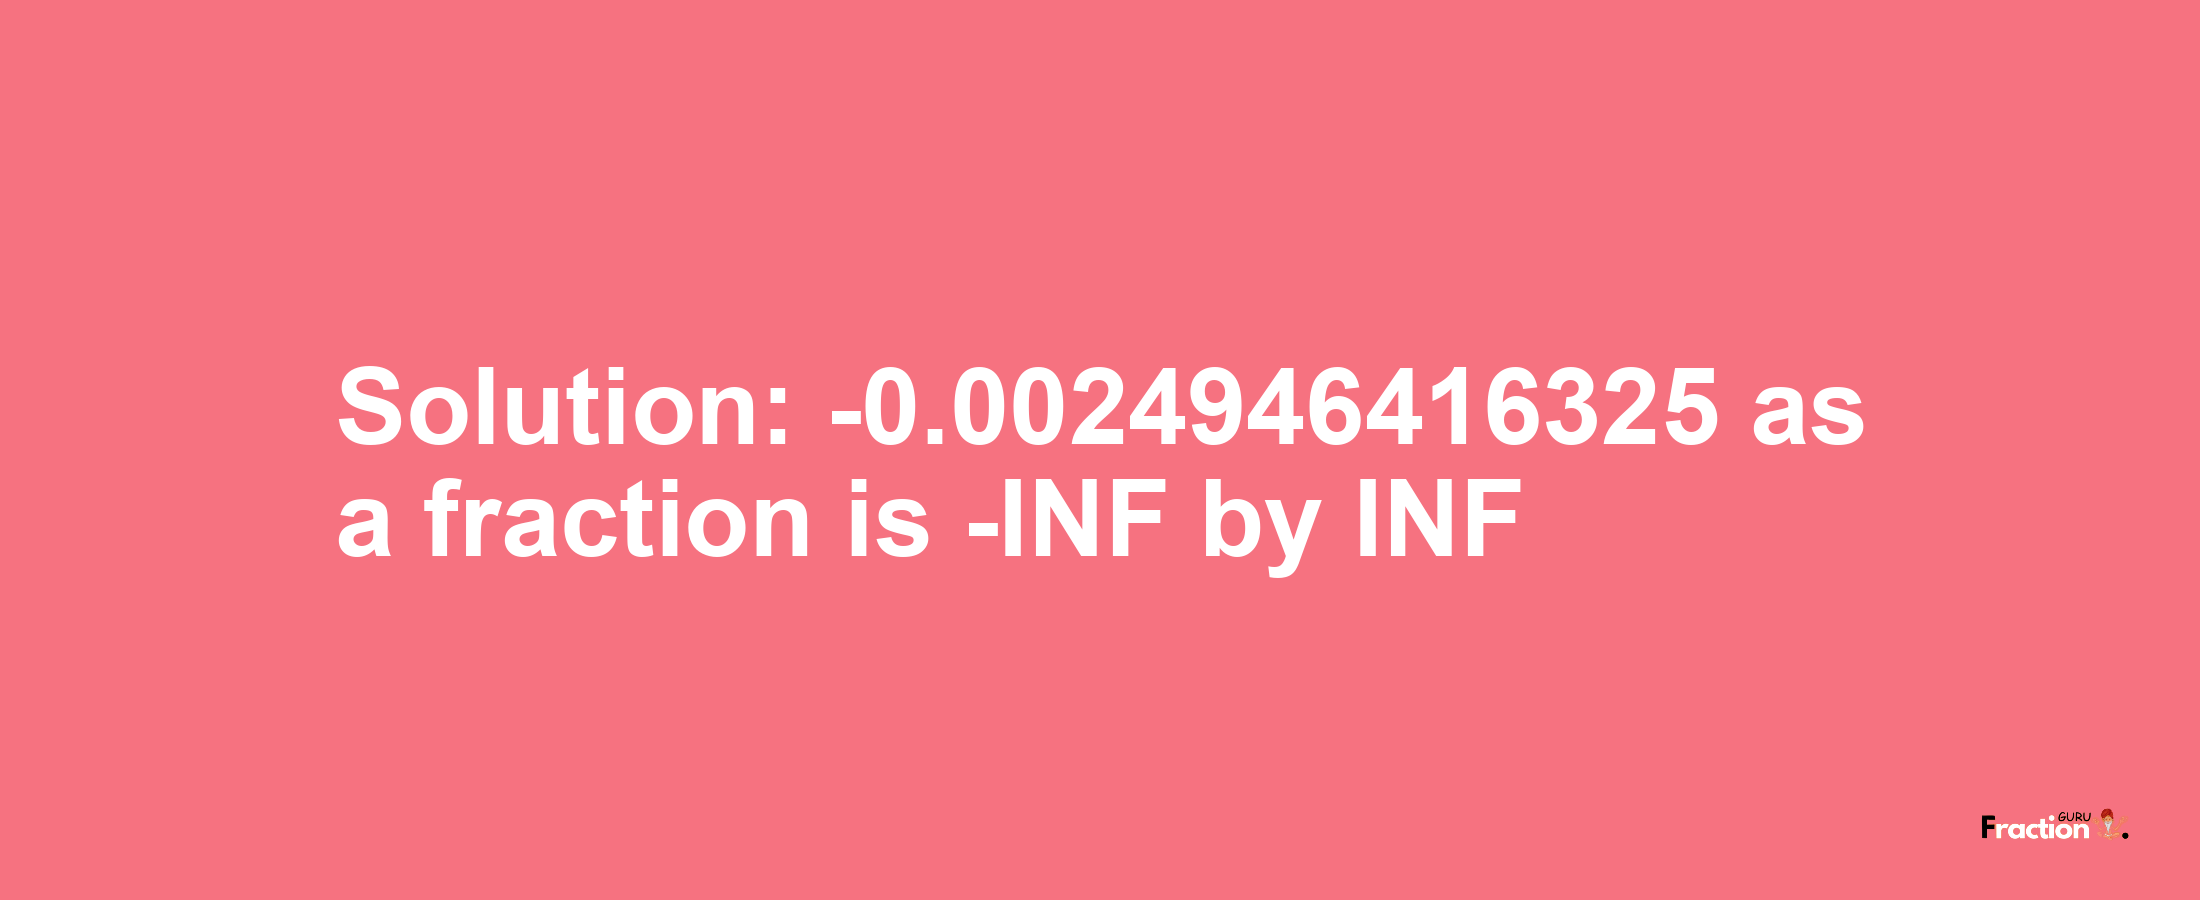 Solution:-0.0024946416325 as a fraction is -INF/INF